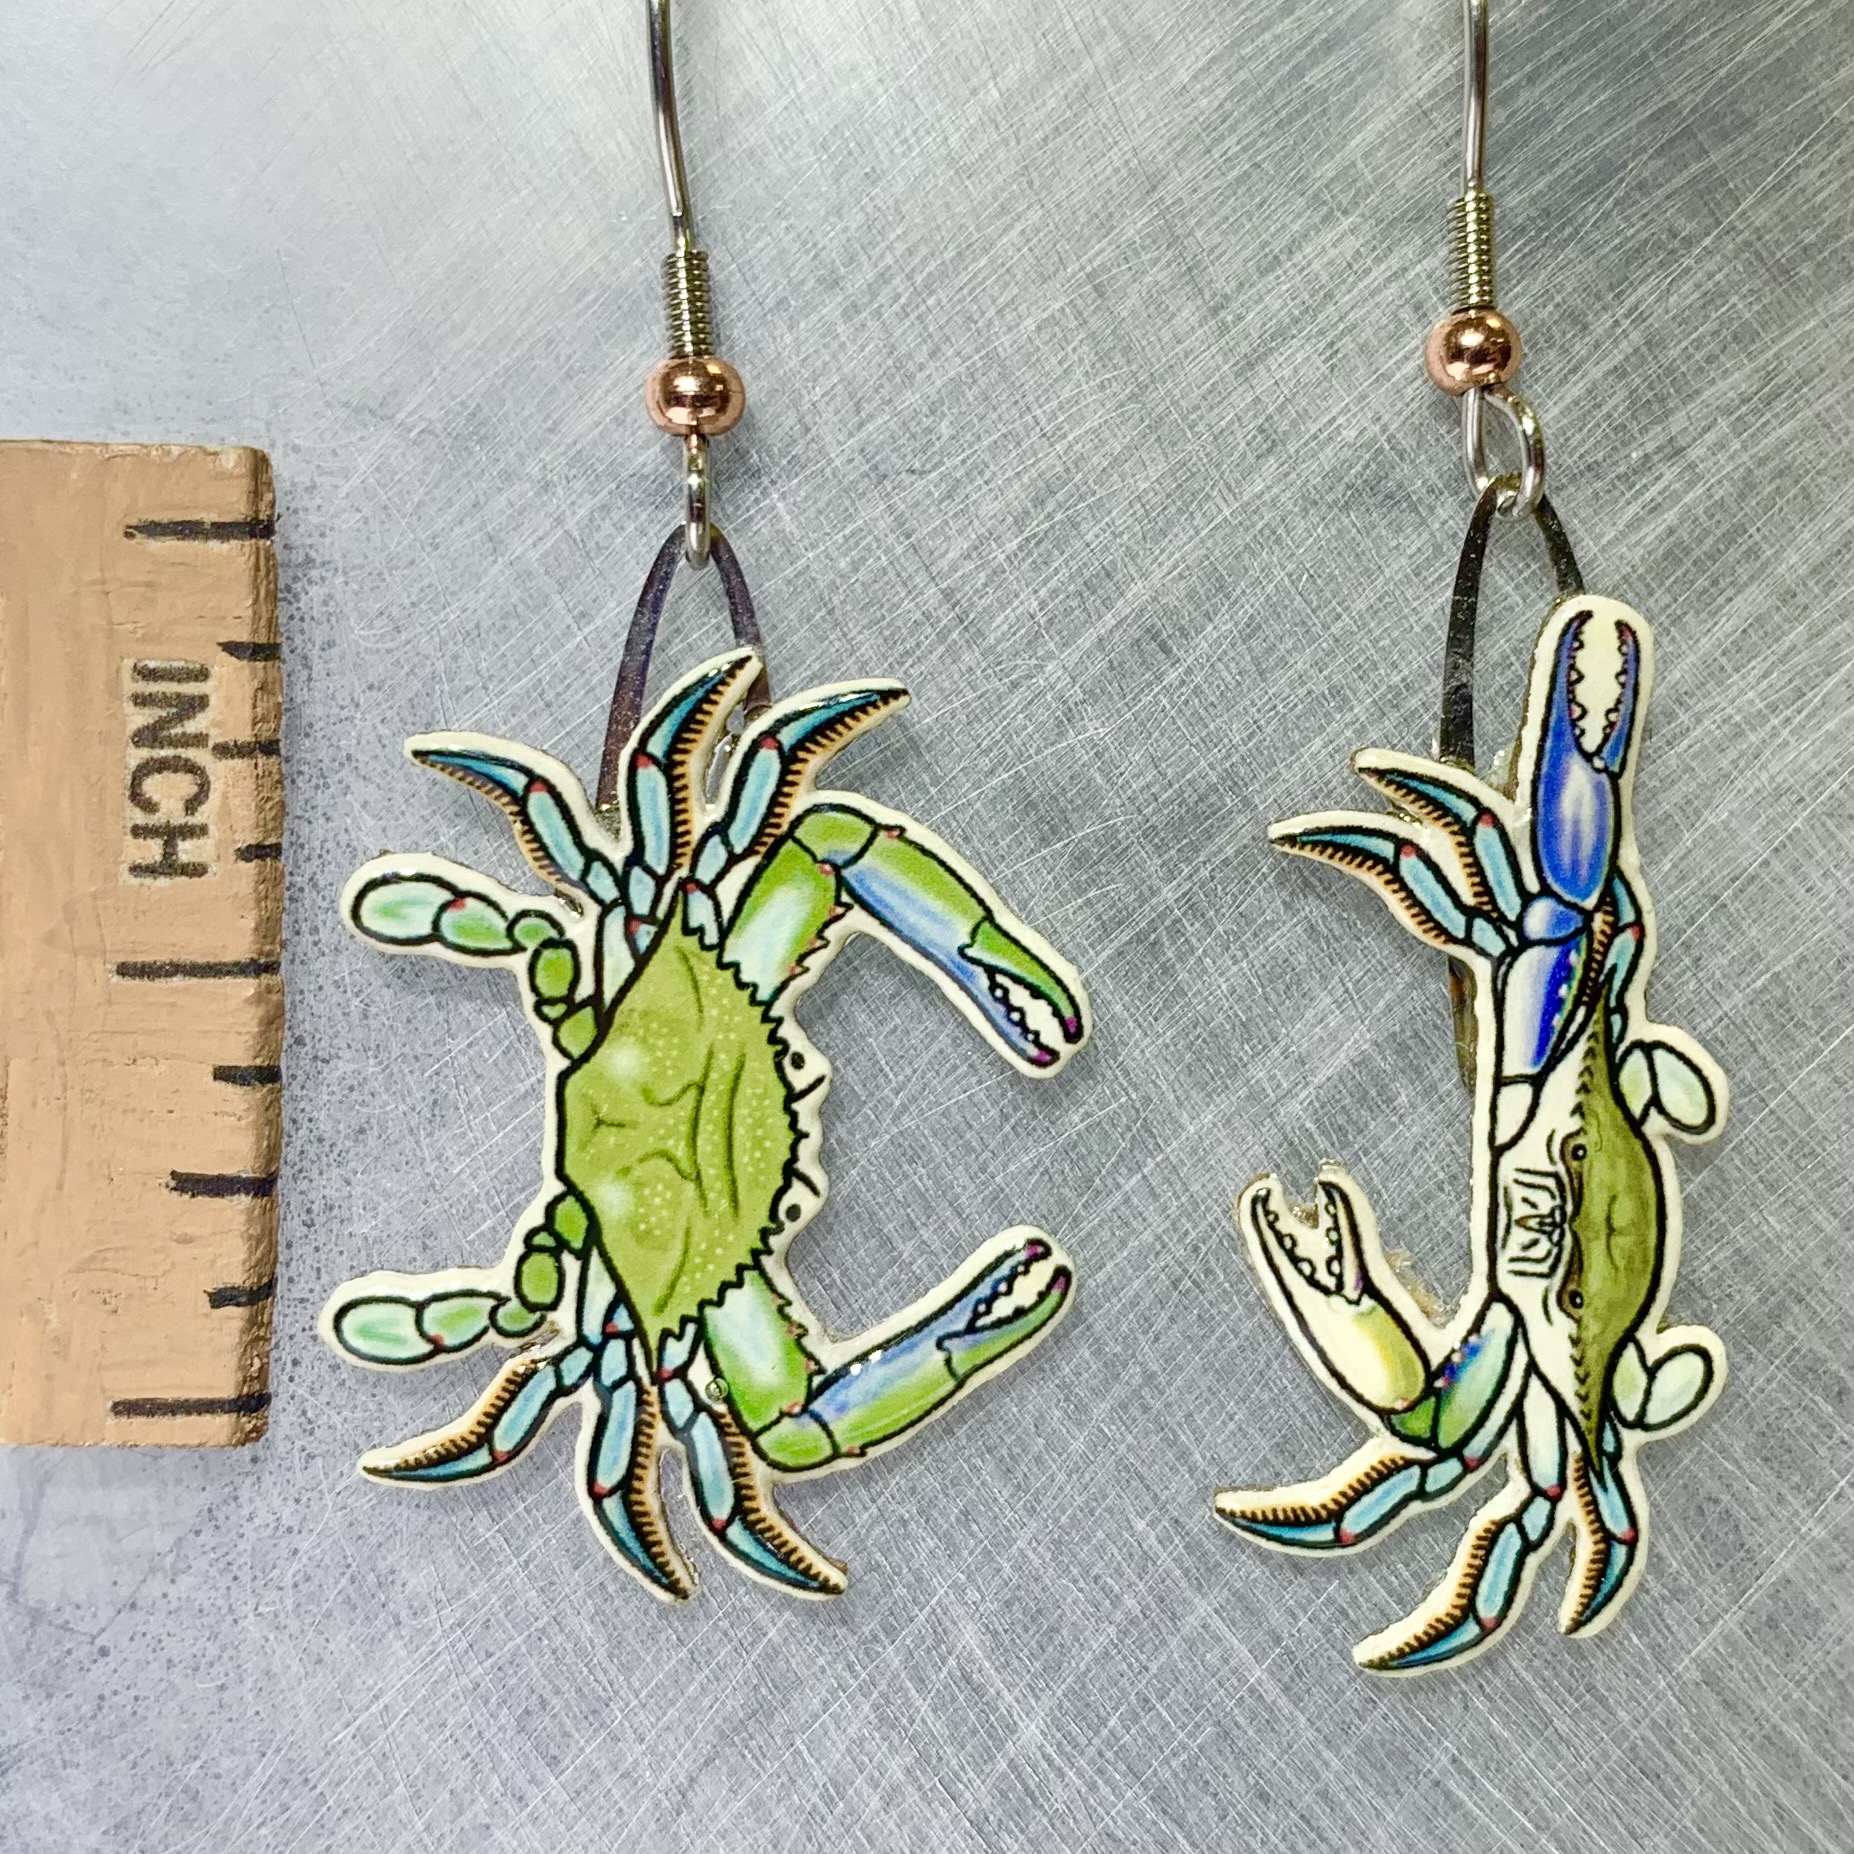 Picture shown is of 1 inch tall pair of earrings of the marine animal the Blue Crab.